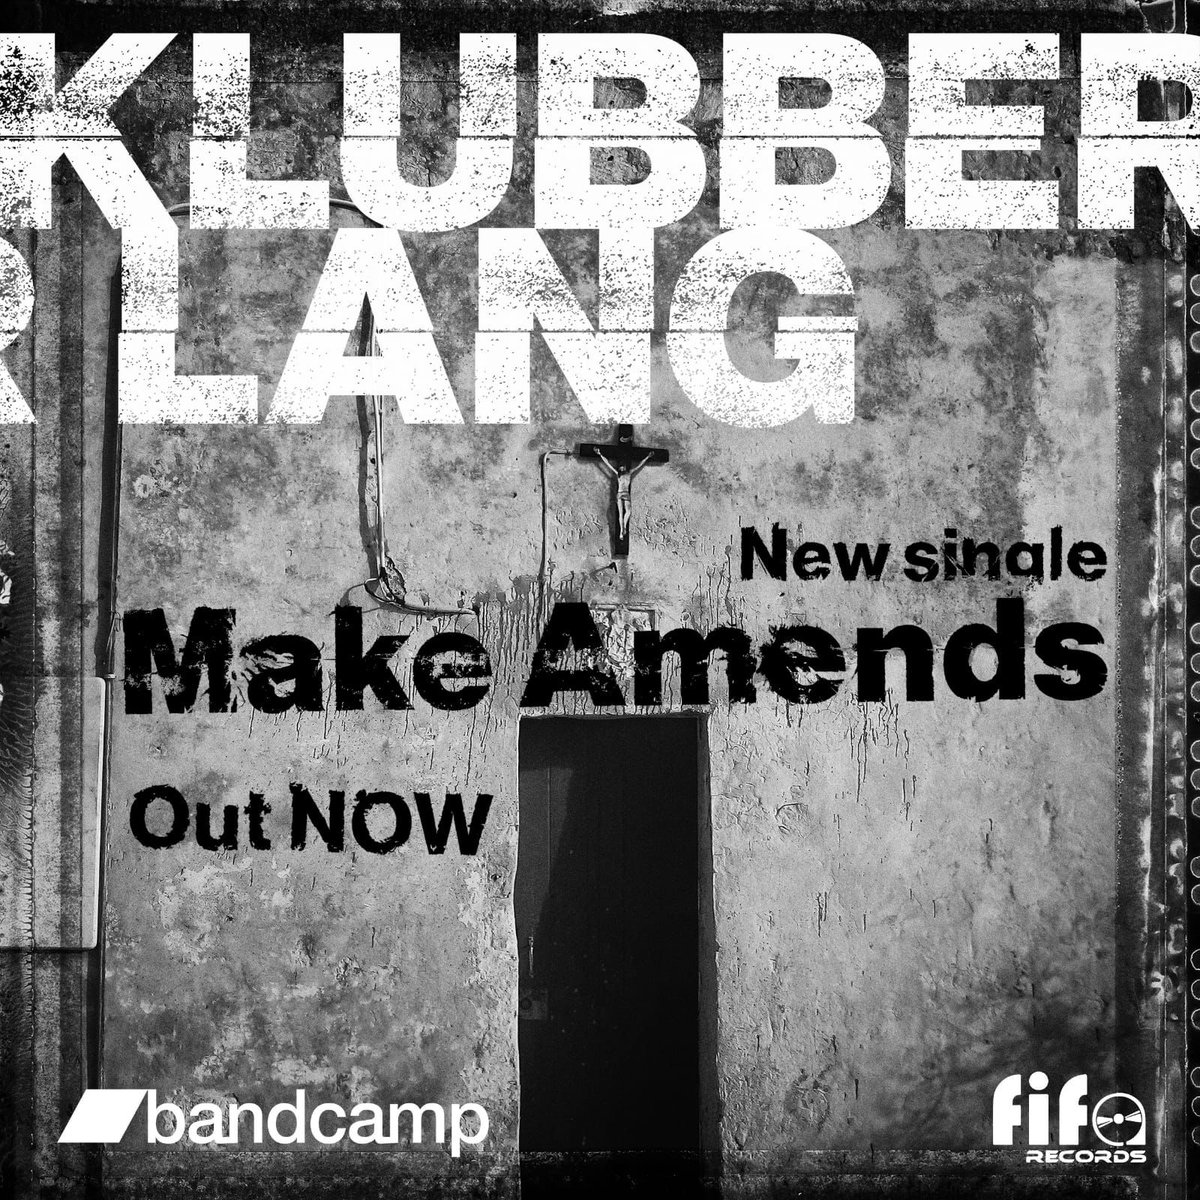 It's new, it's brilliant, it's 'Make Amends' the latest offering from @klubberlangmusic & it is OUT NOW💥 Available from bandcamp ⬇️
klubberlang.bandcamp.com/track/make-ame…
 & @minm_music 👊
#klubberlang #makeamends #newirishmusic #newsingle #outnow #FIFARecords #corkfifa